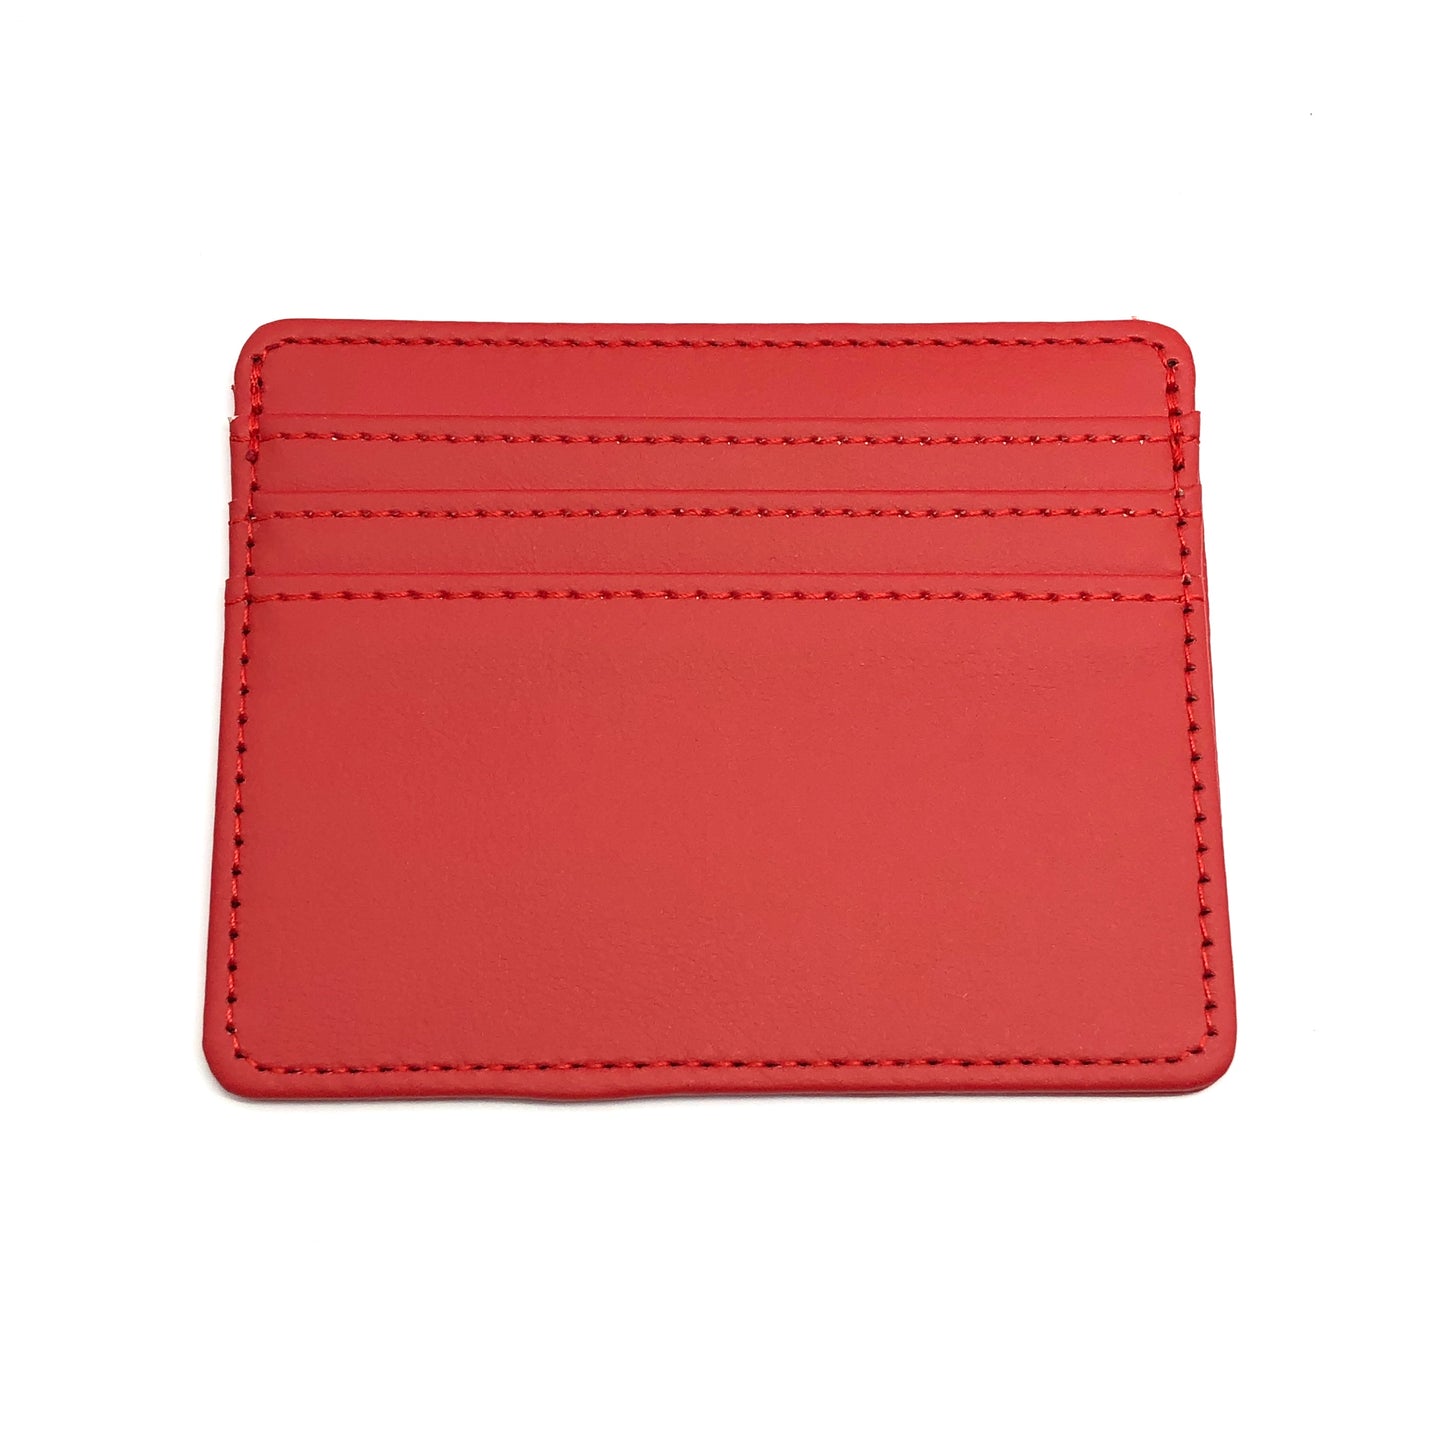 Credit Card Holder Wallet, 4in Red Faux Leather Thin Slim Profile Wallet